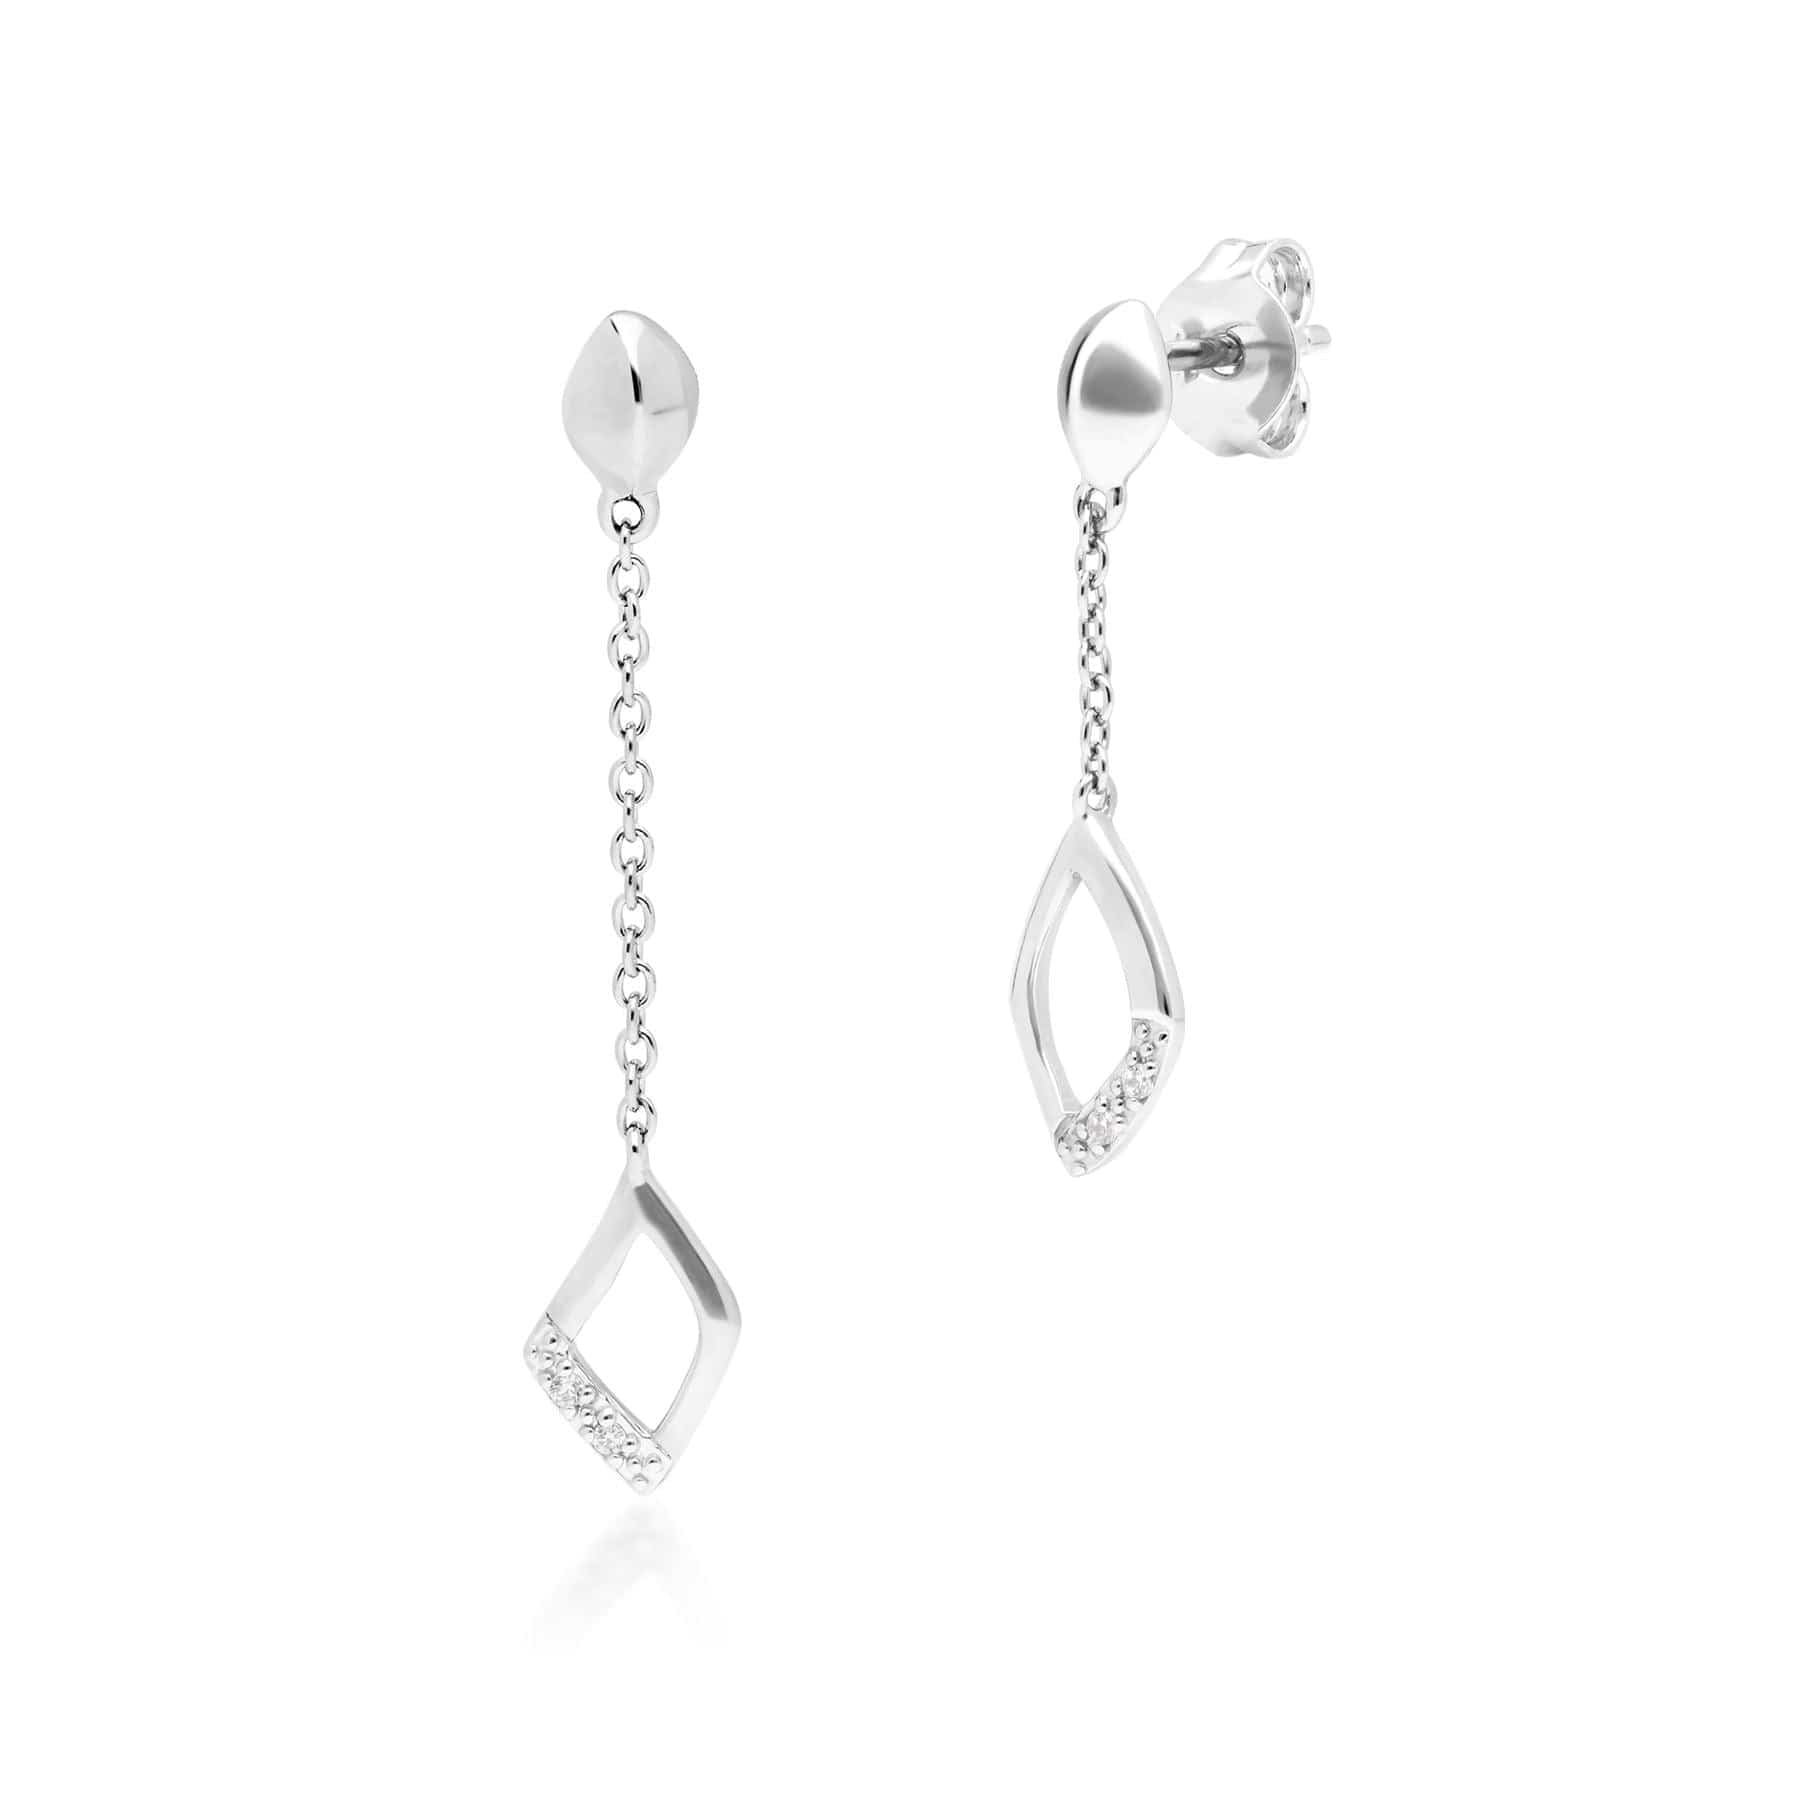 Image of Diamond Pave Mismatched Dangle Drop Earrings in 9ct White Gold